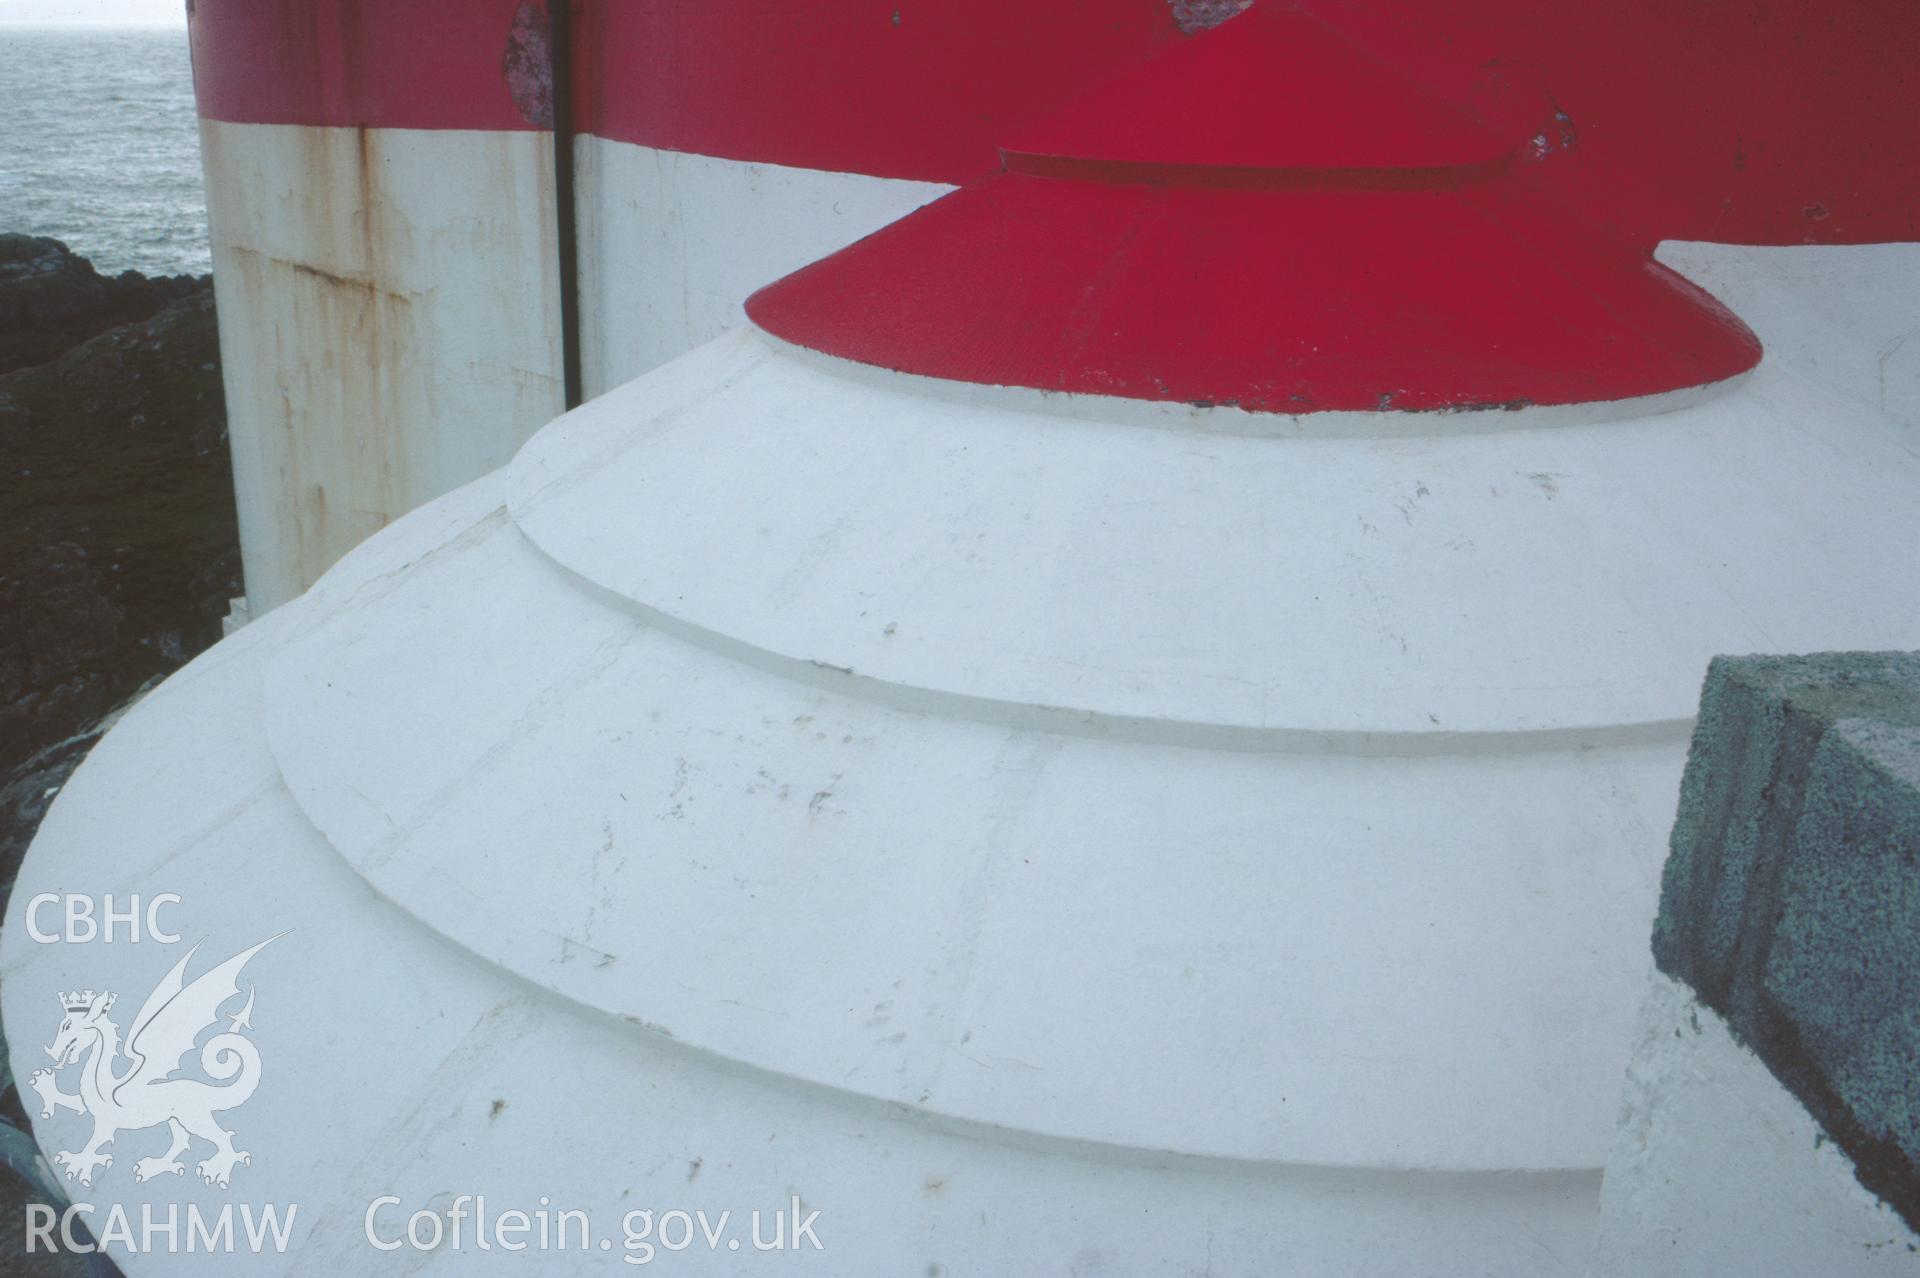 Colour slide showing the porch roof of the lighthouse.